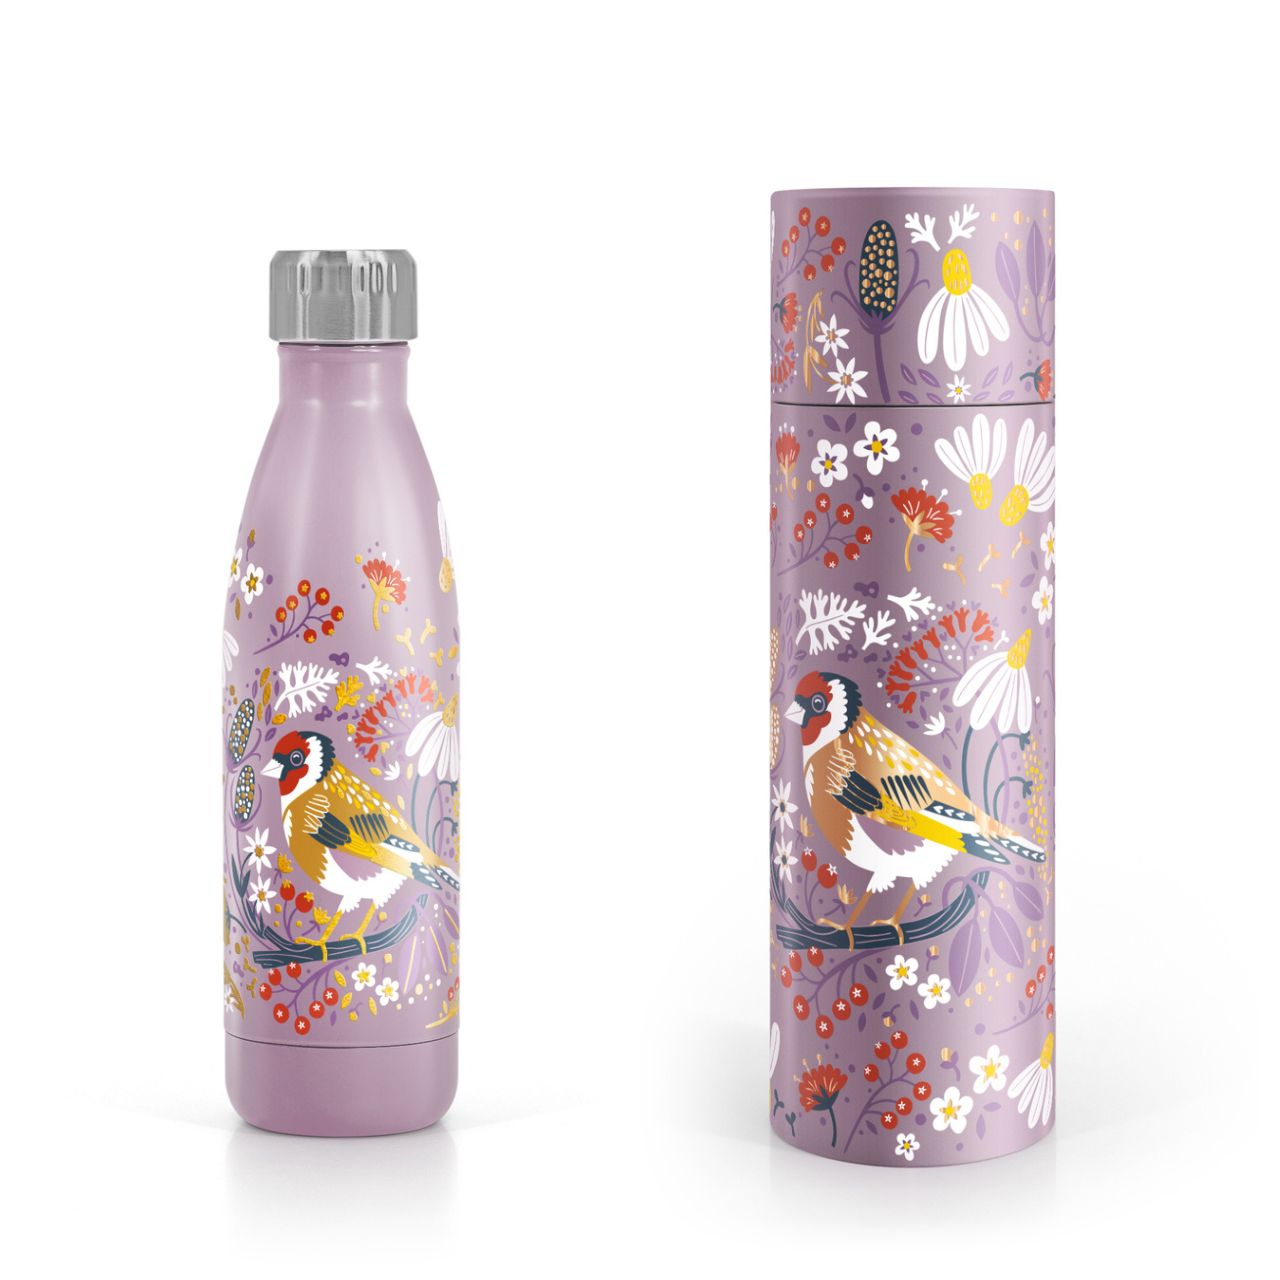 Tipperary Crystal Birdy Metal Water Bottle - Goldfinch  The Birdy Collection is a series of 6 exclusively commissioned illustrations inspired by native Irish birds; Bullfinch, Goldfinch, Blue tit, Greenfinch, Kingfisher and Robin.